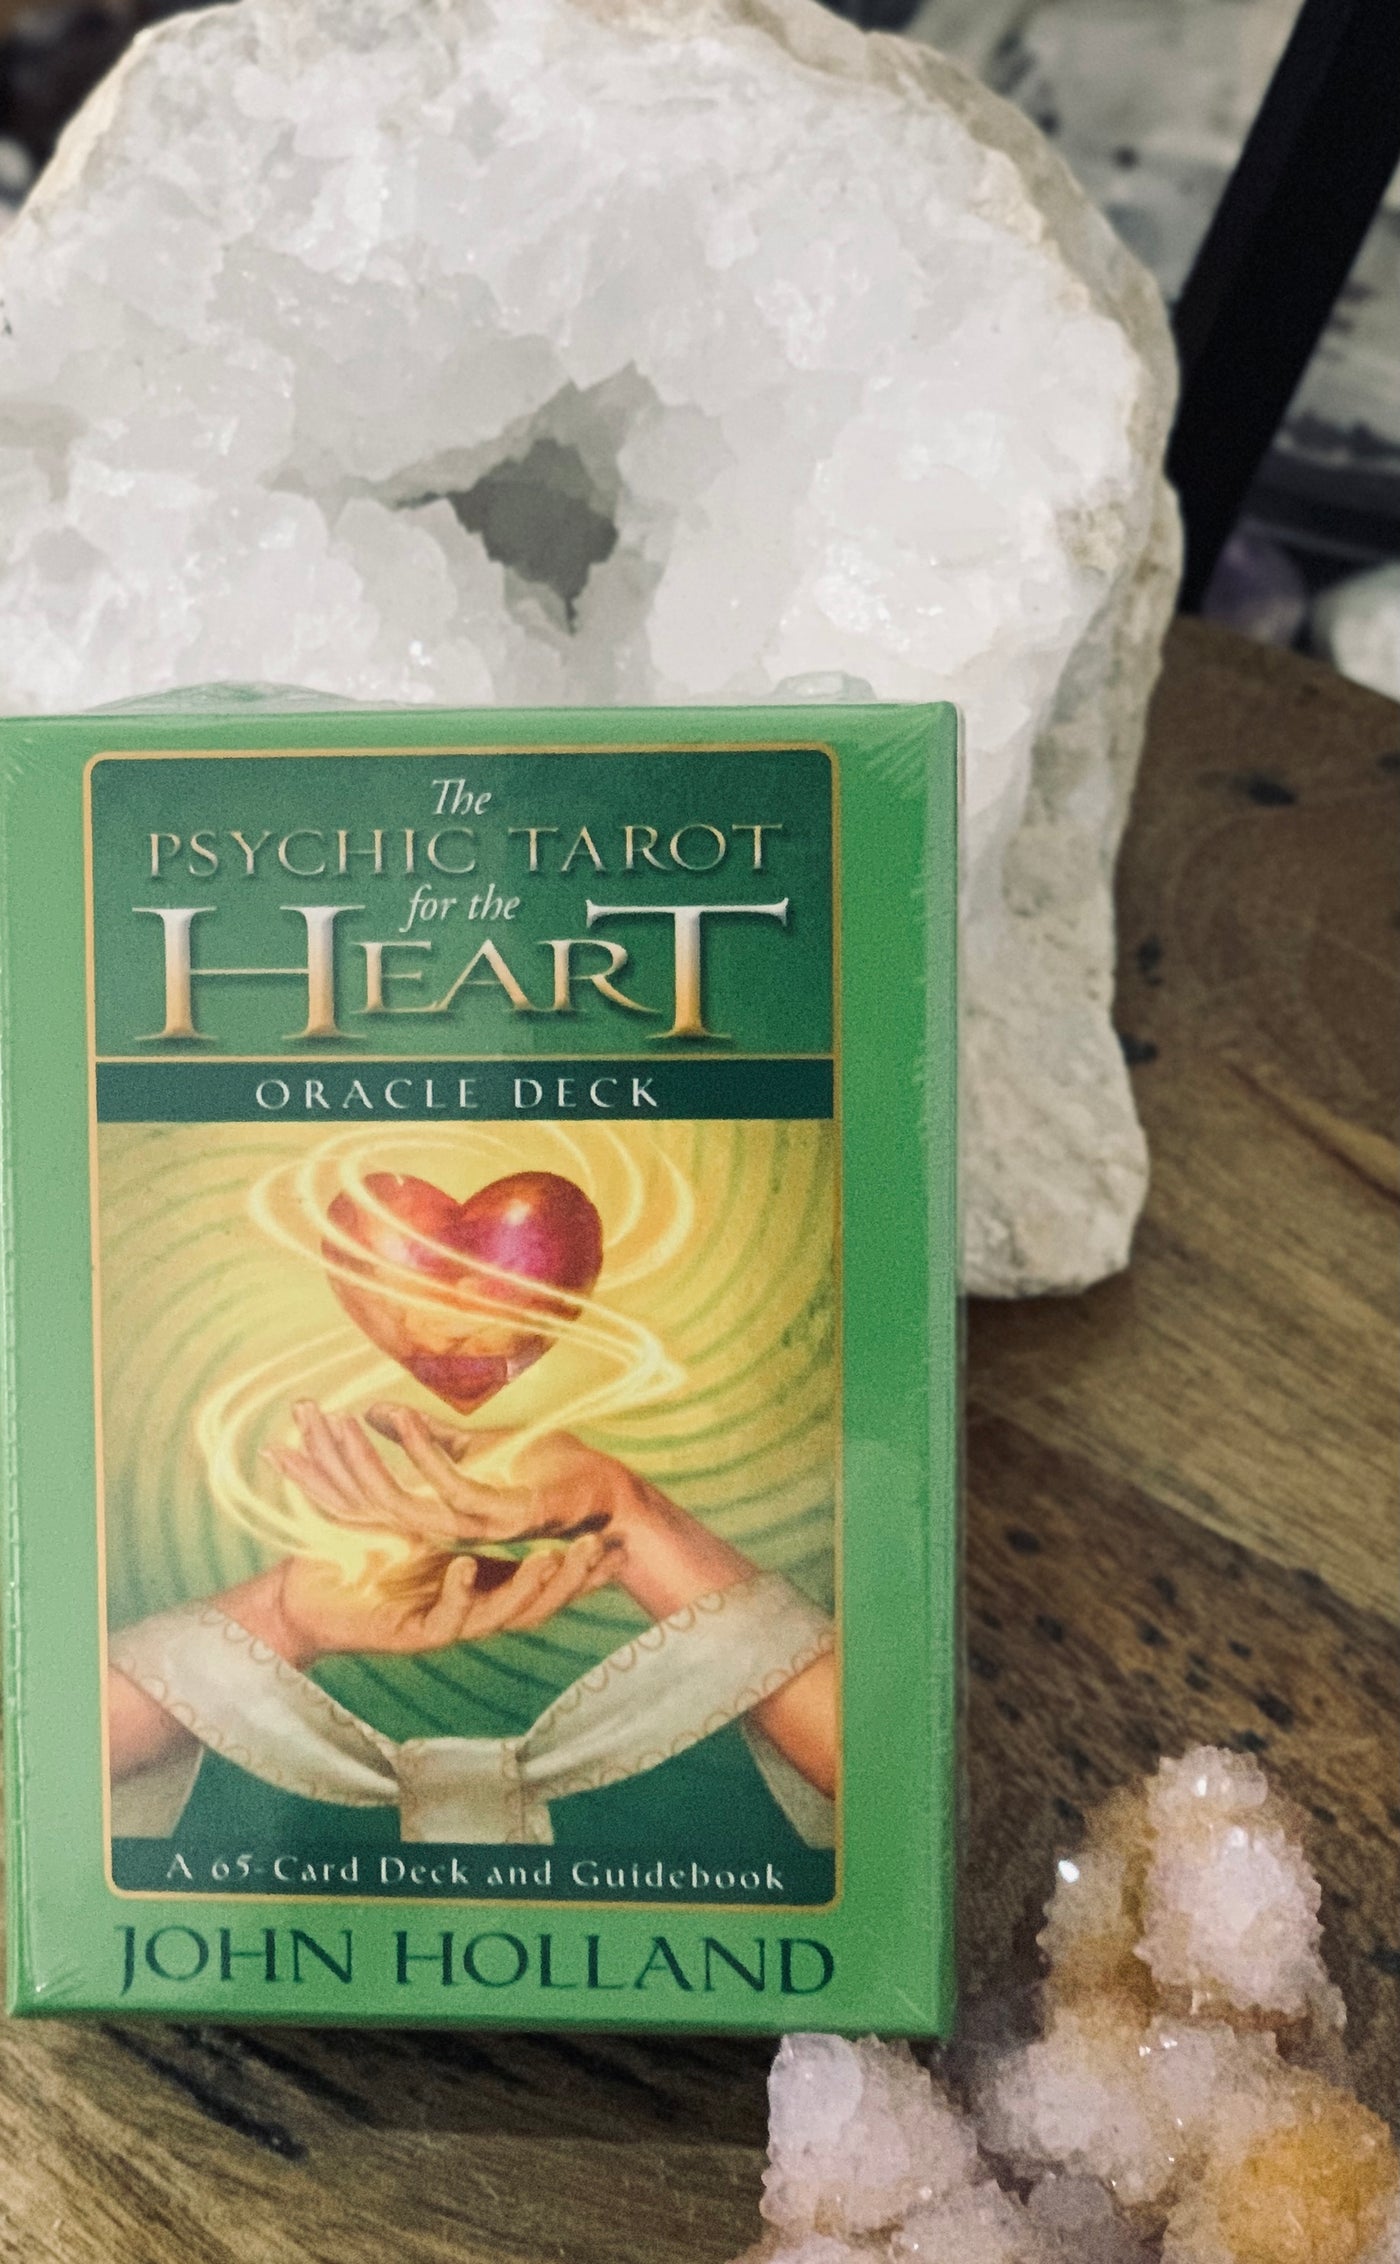 The Psychic Tarot for the Heart Oracle deck